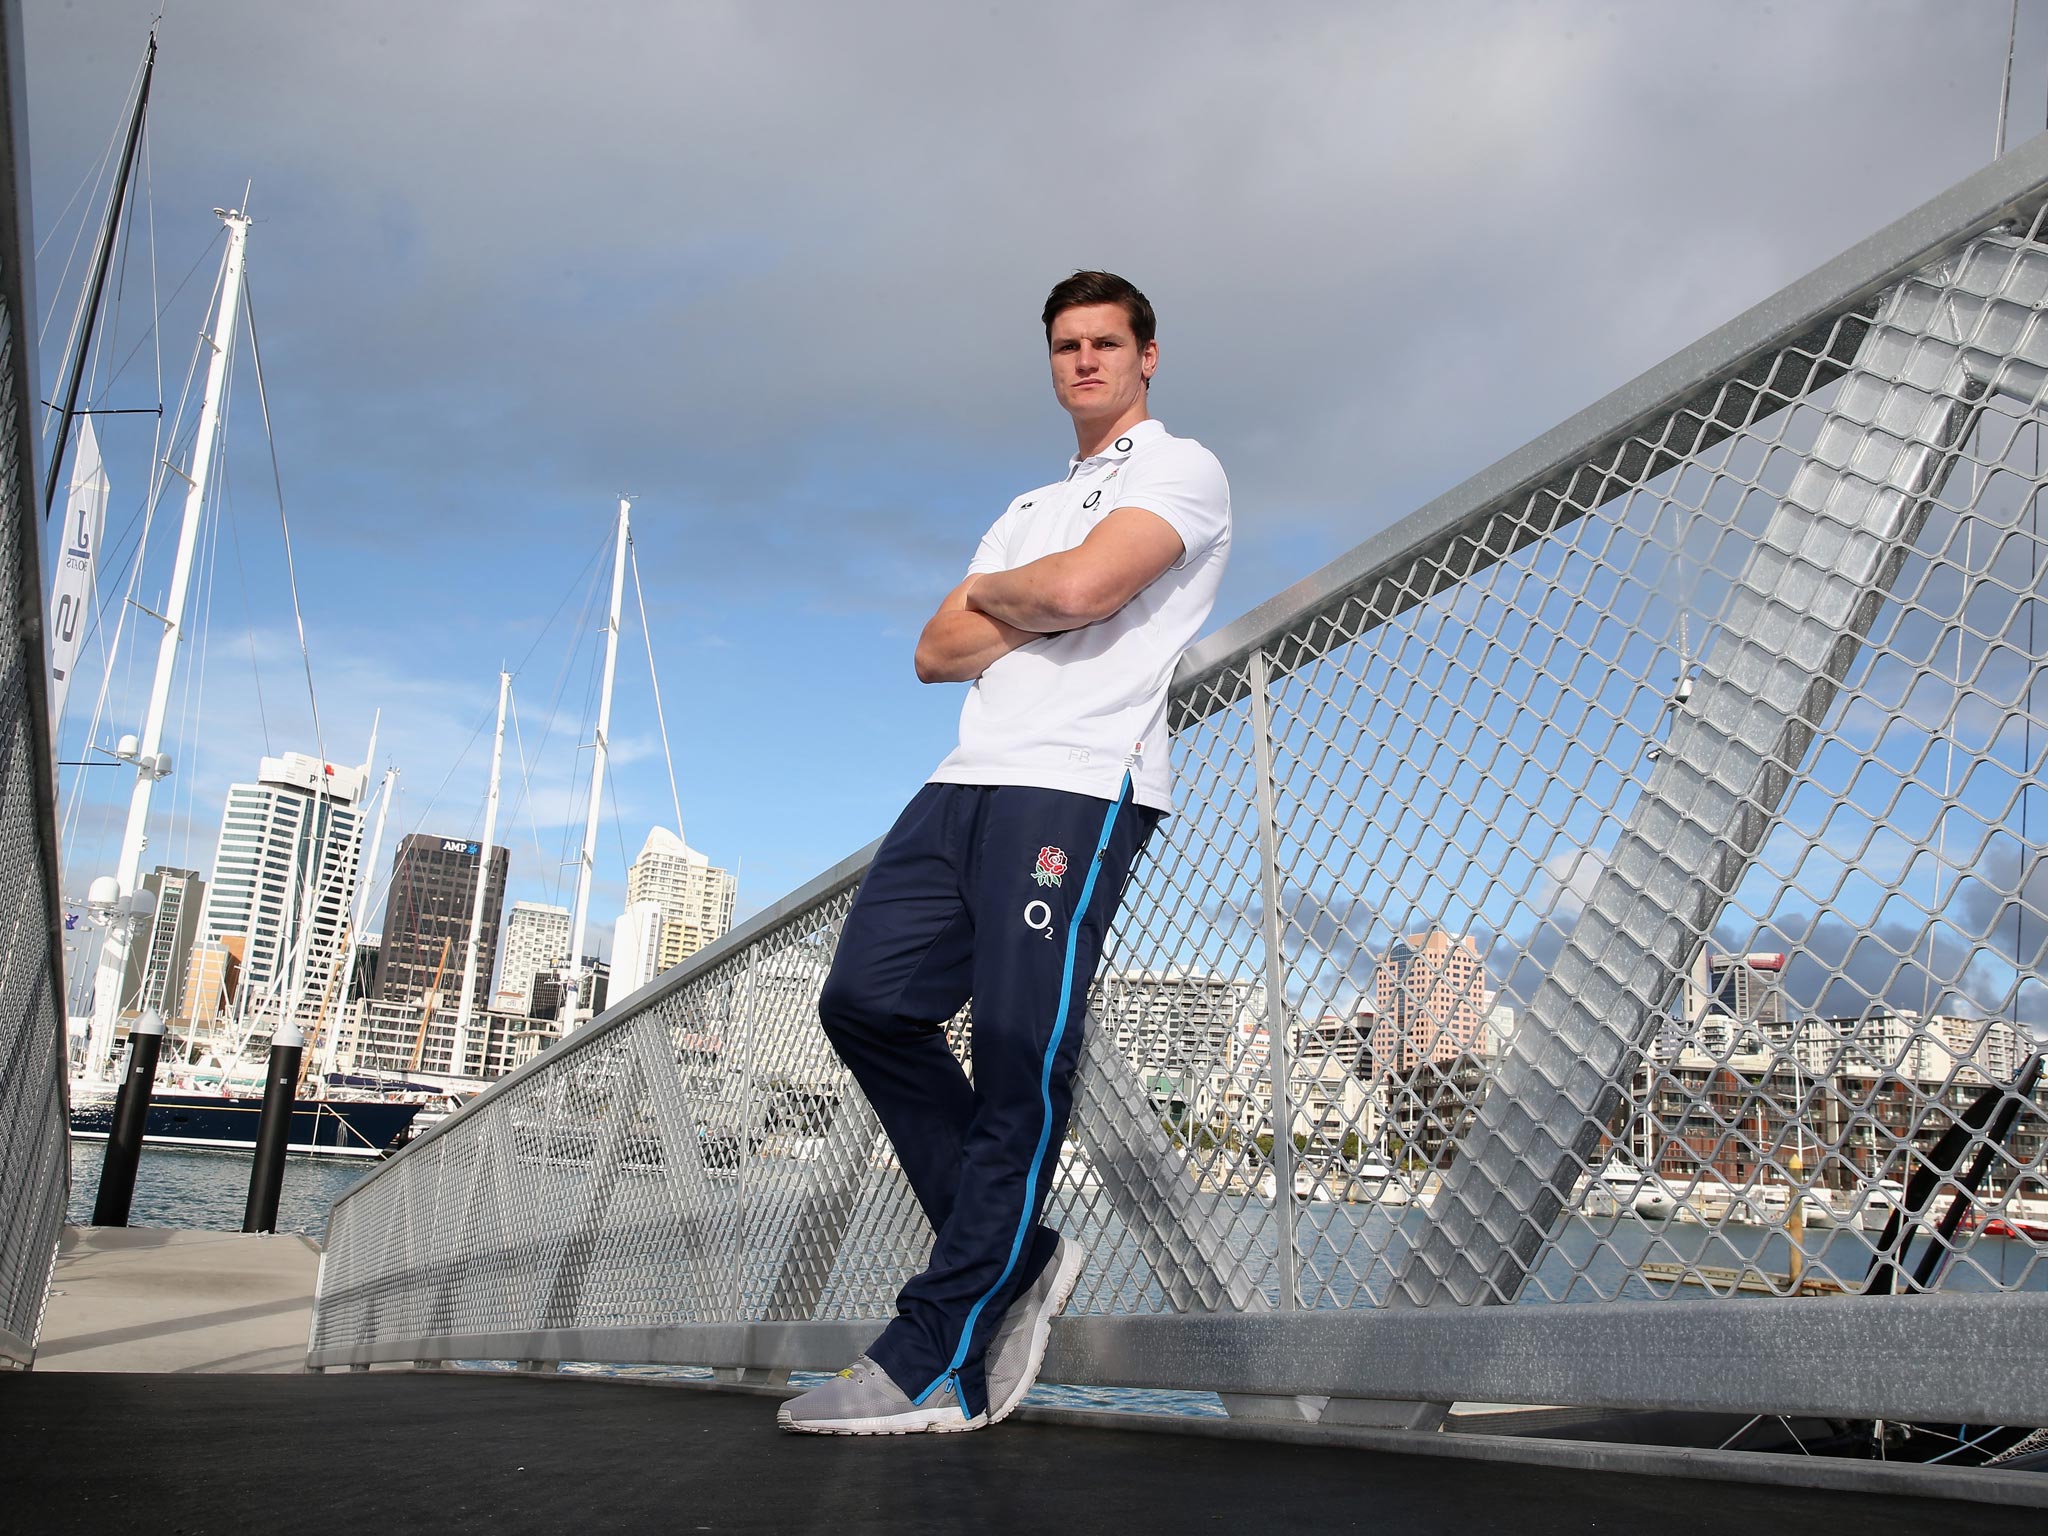 Freddie Burns enjoys the harbour at Auckland after almost burning his bridges back
home at Gloucester last season